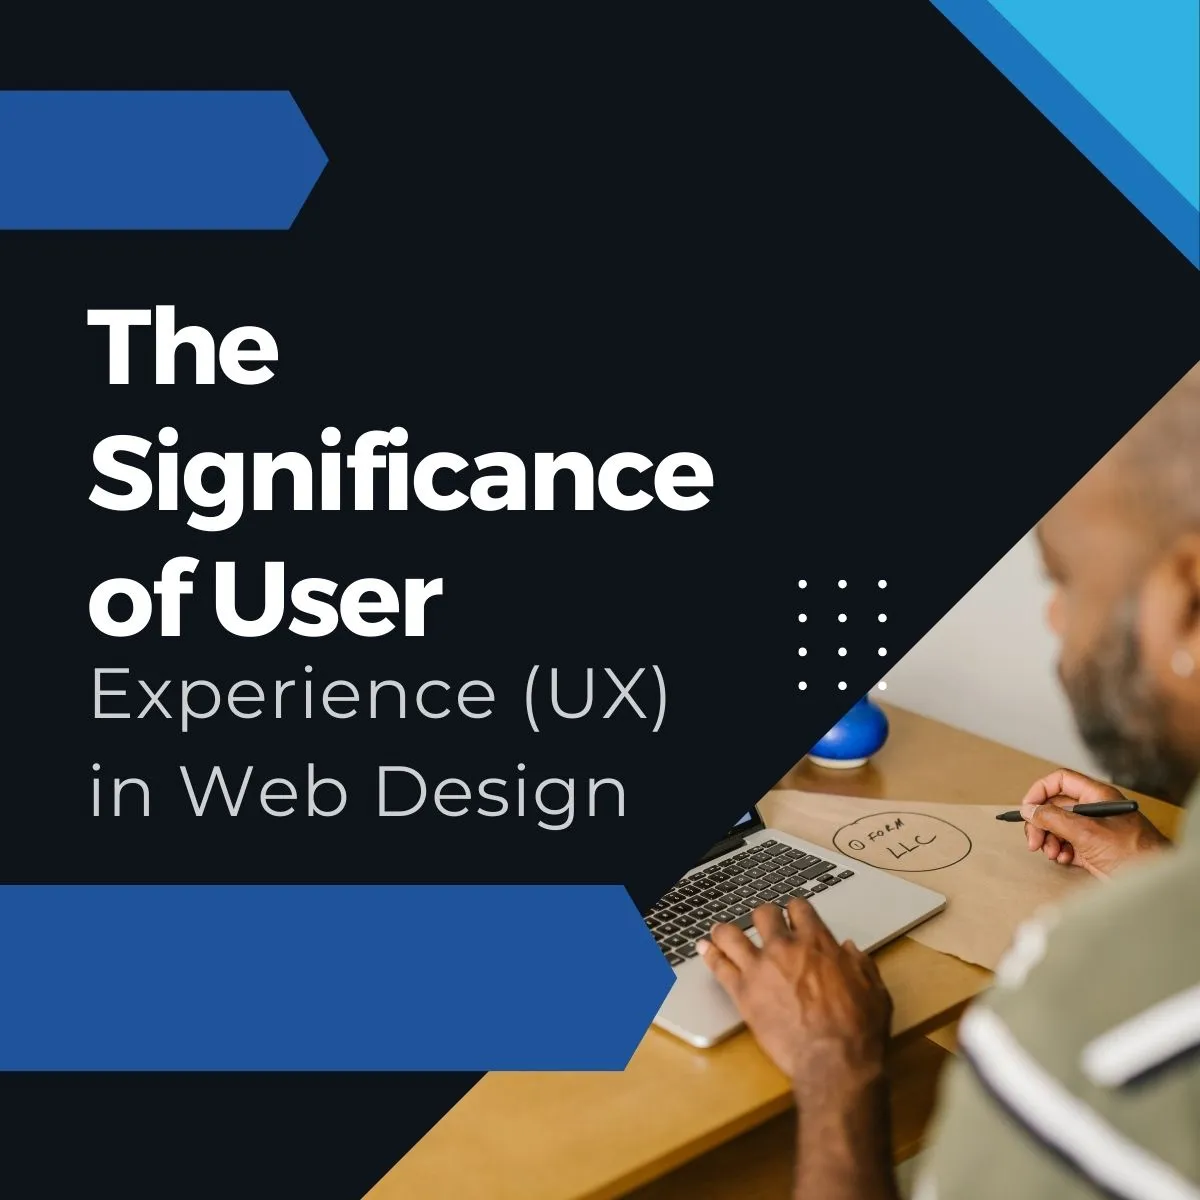 The Significance of User Experience (UX) in Web Design